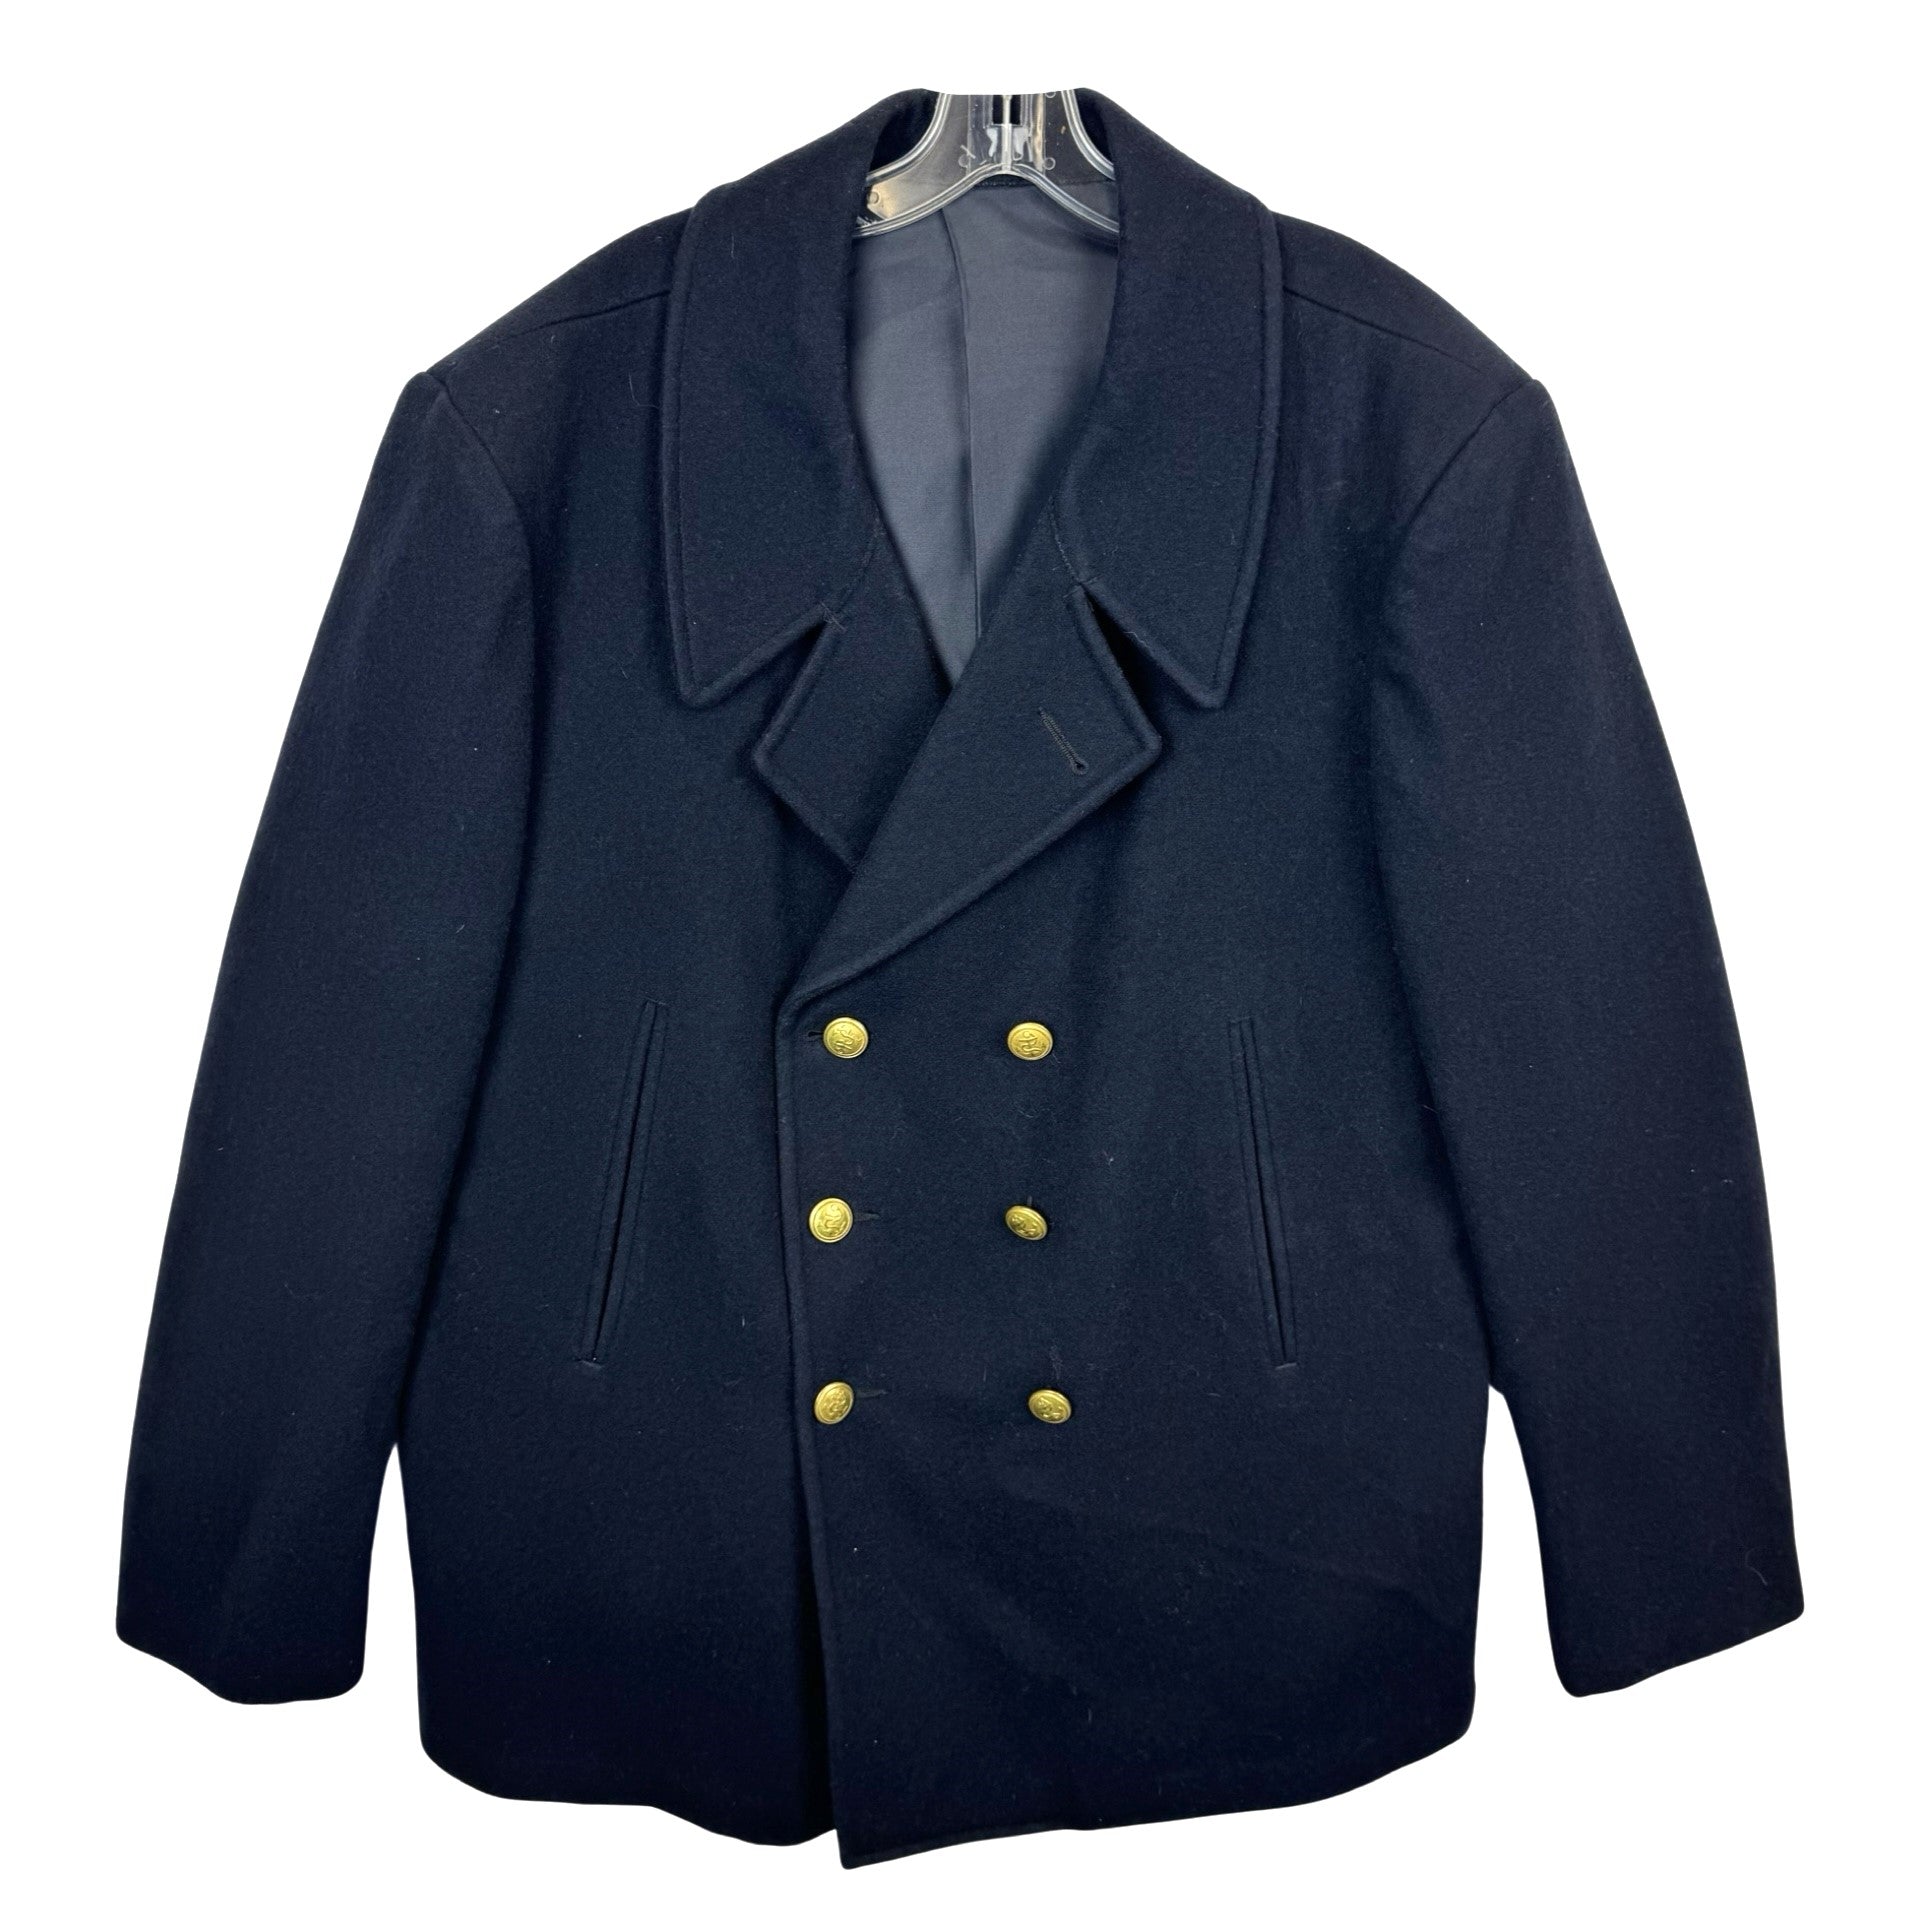 Vintage Double Breasted Naval Peacoat